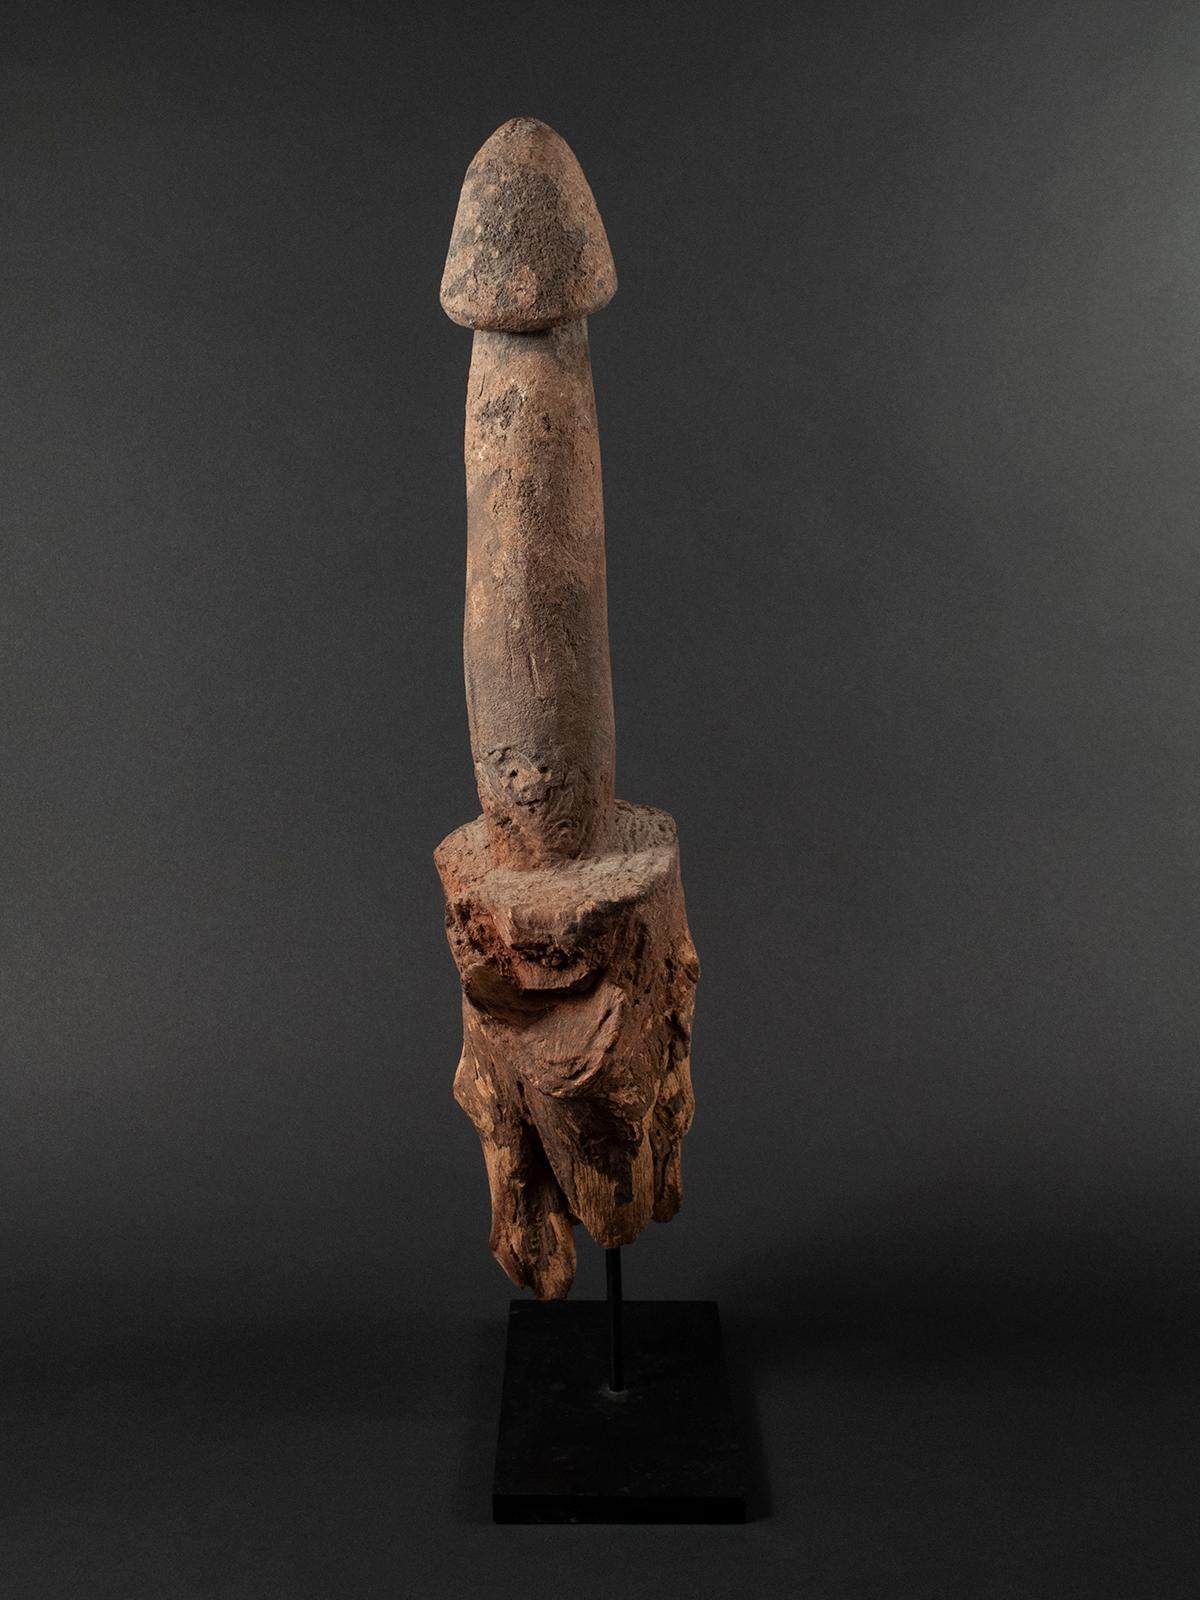 Late 19th-early 20th century wood Legba phallus, Fon people, West Africa

A very large carved hardwood phallus from the Fon Tribe on the border of Togo and Ghana. These are called Legba, named after a deity, and were placed in the ground to